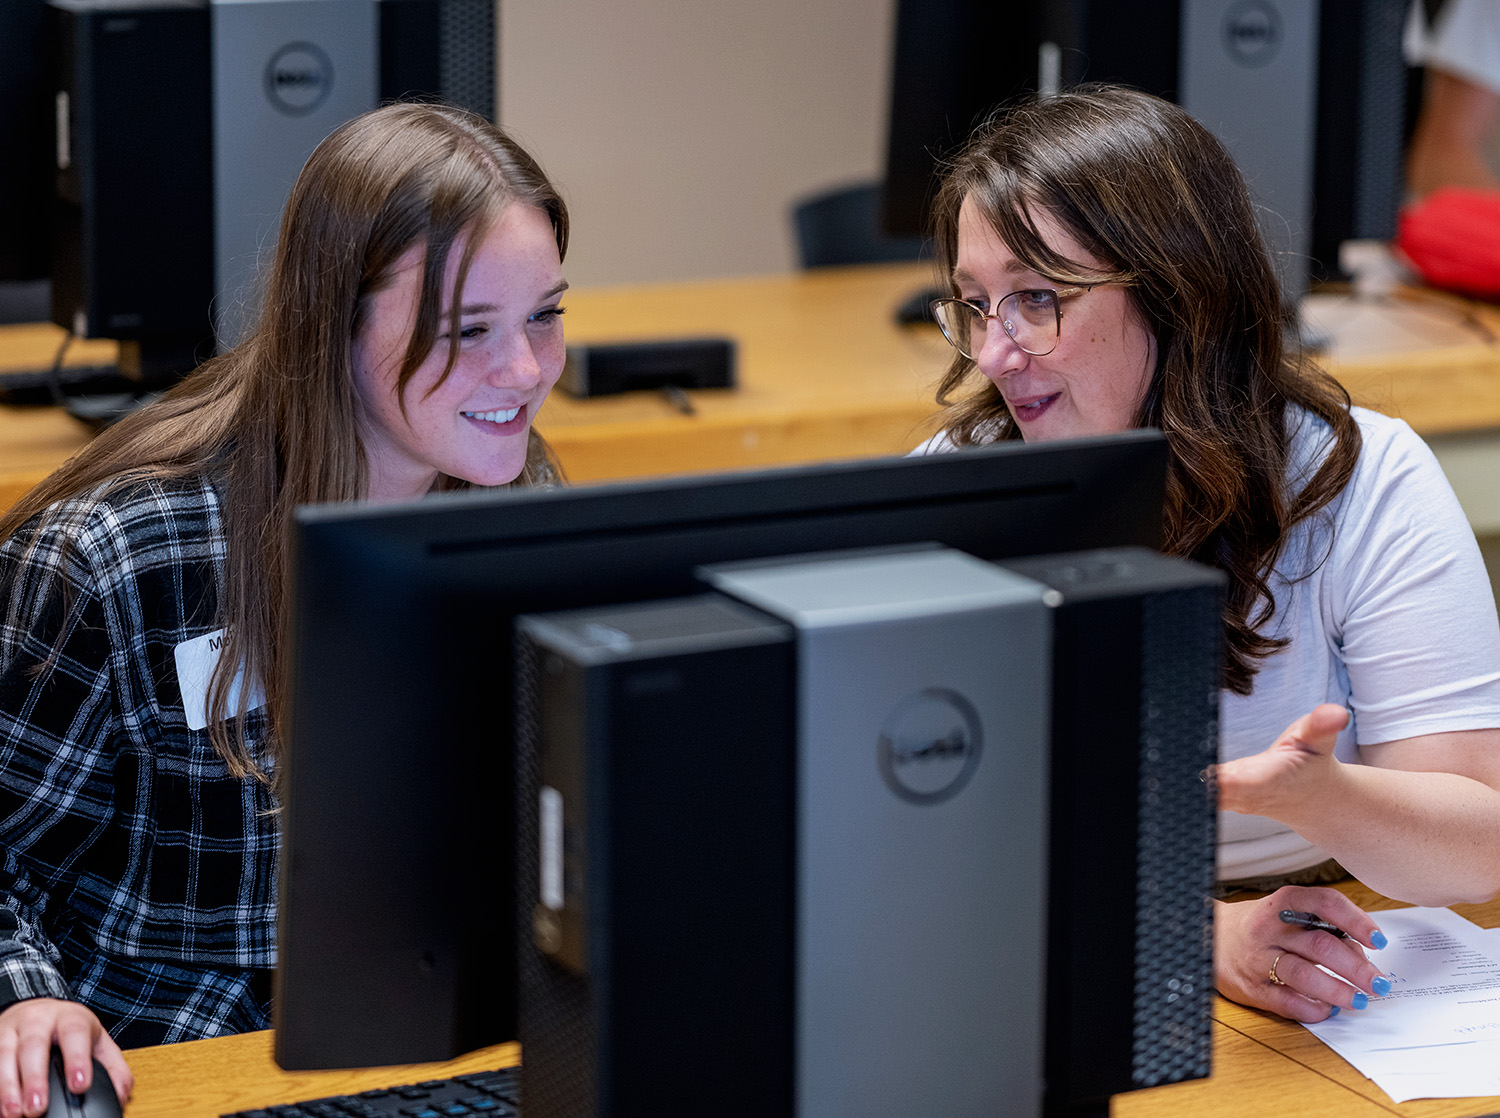 A library staff member helps a student find something on their computer